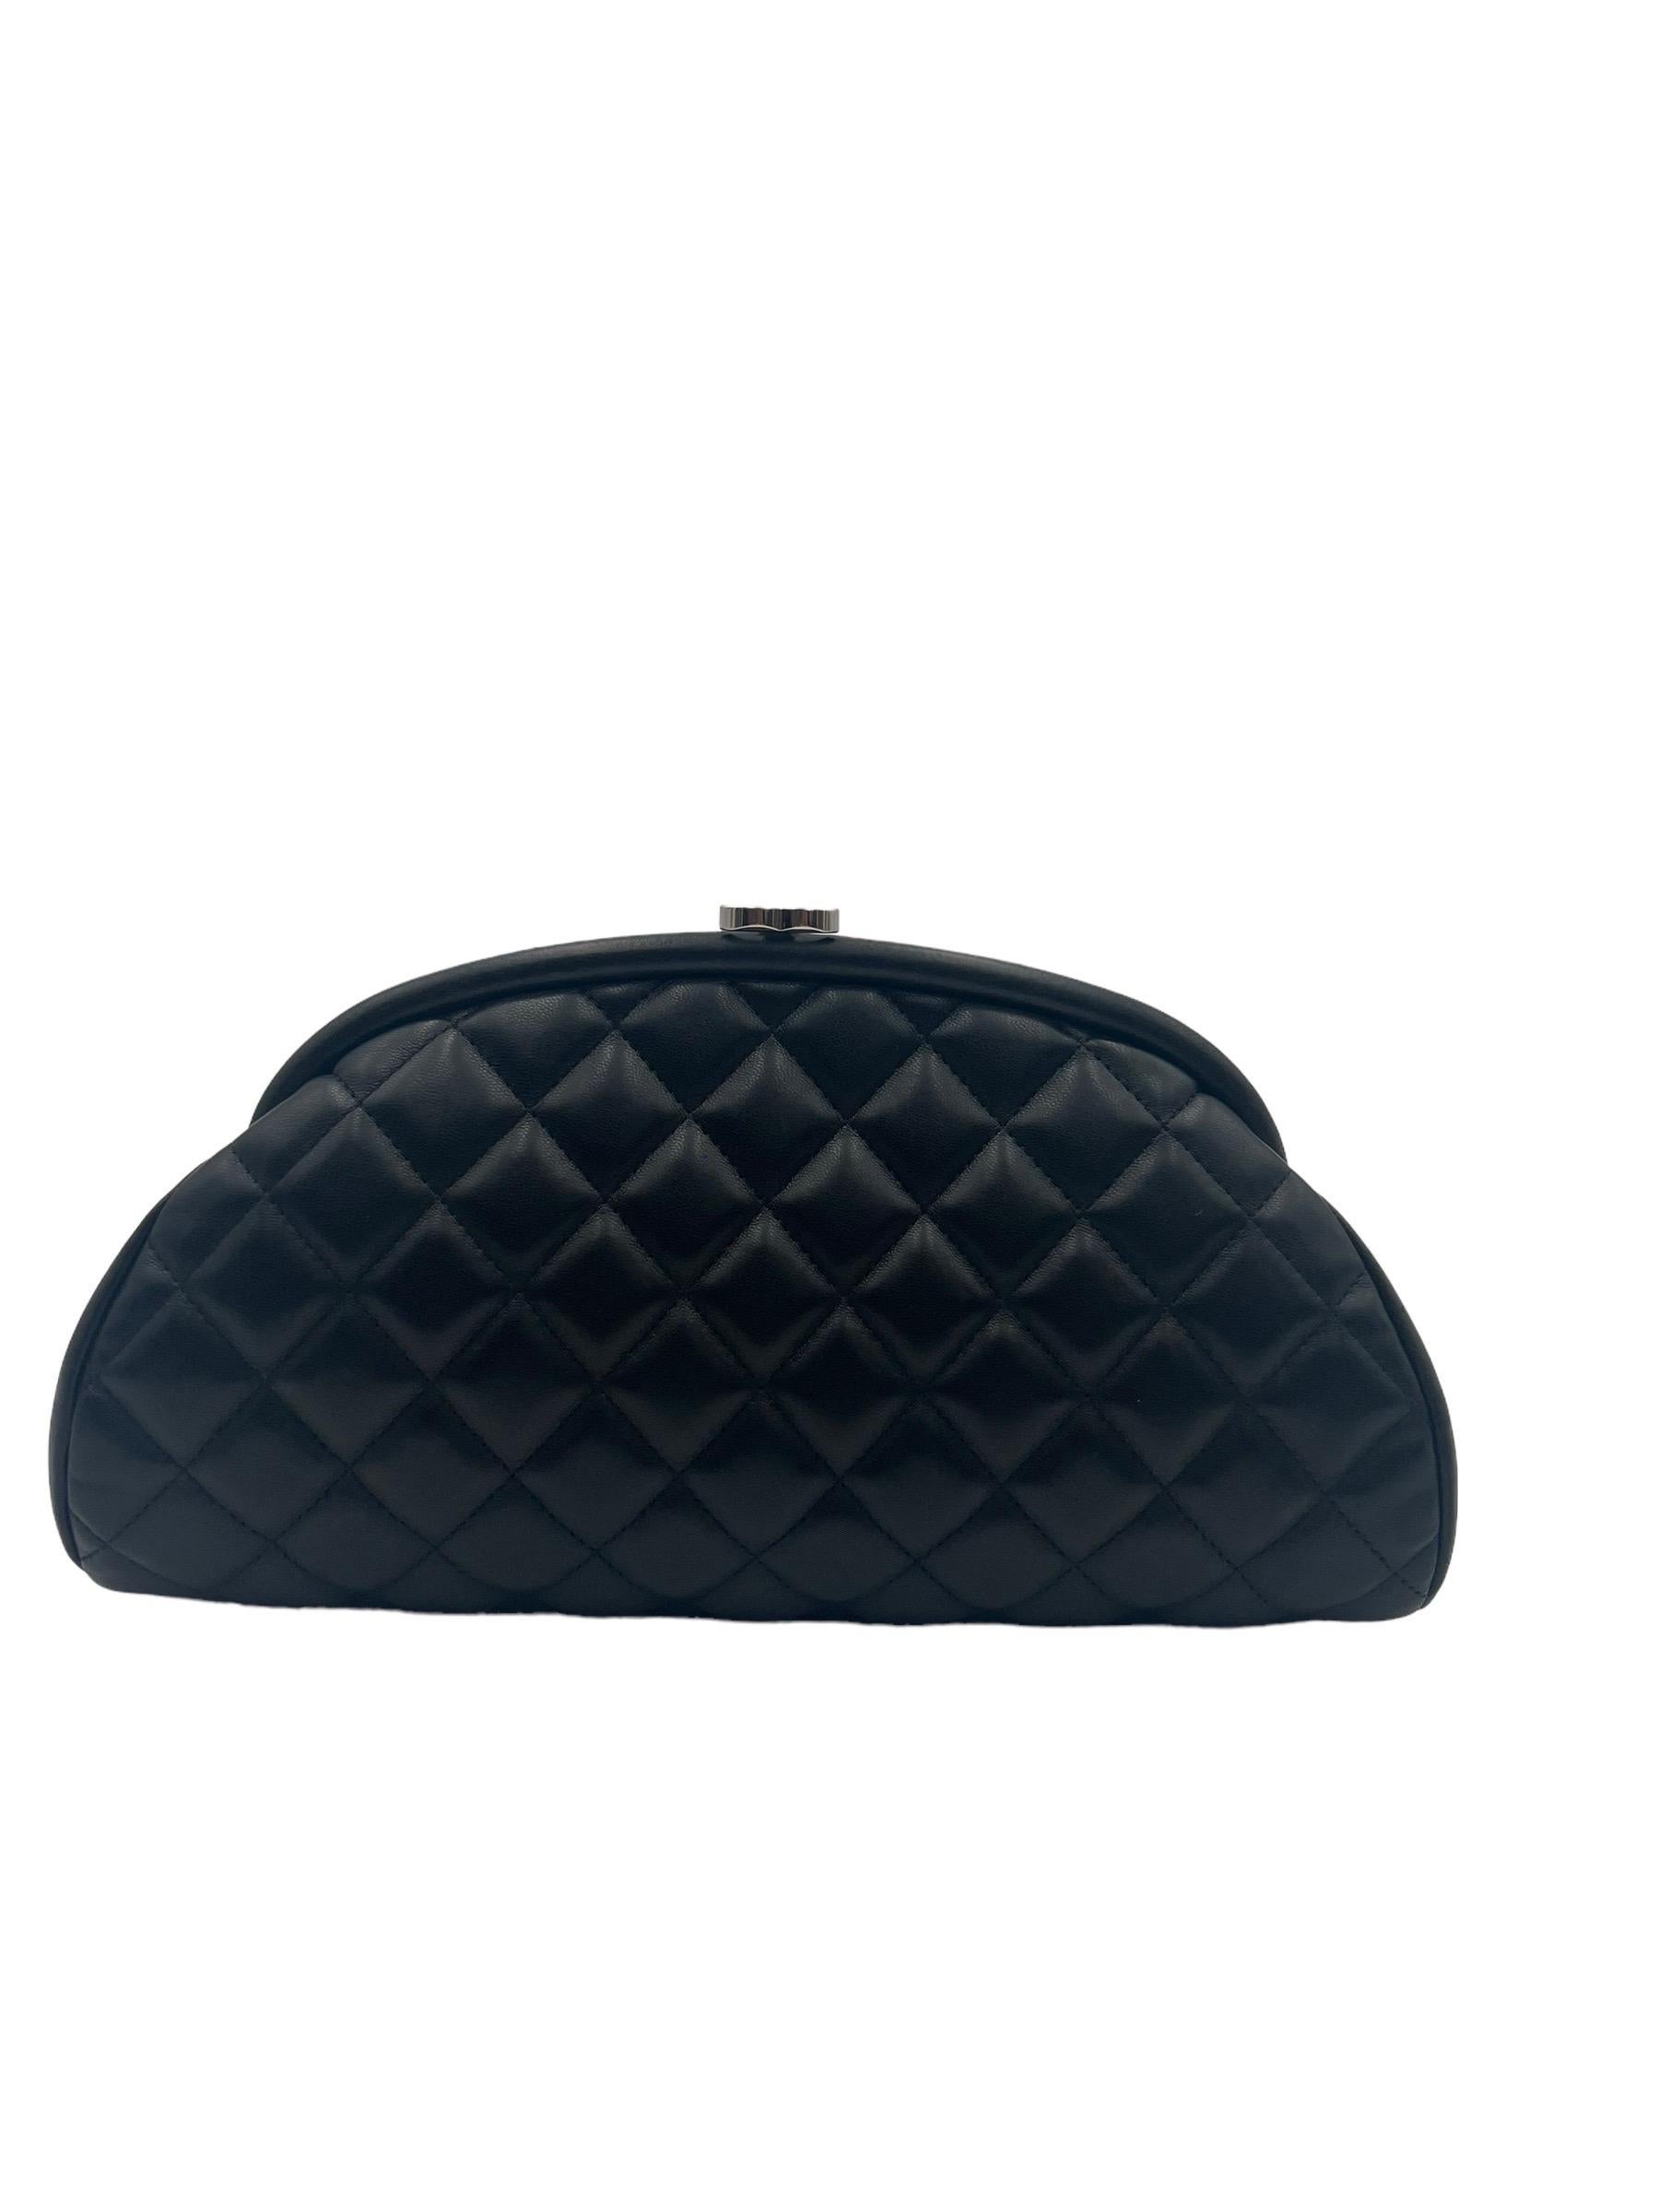 2011 Chanel Clutch Timeless Black Leather Handle Bag  4